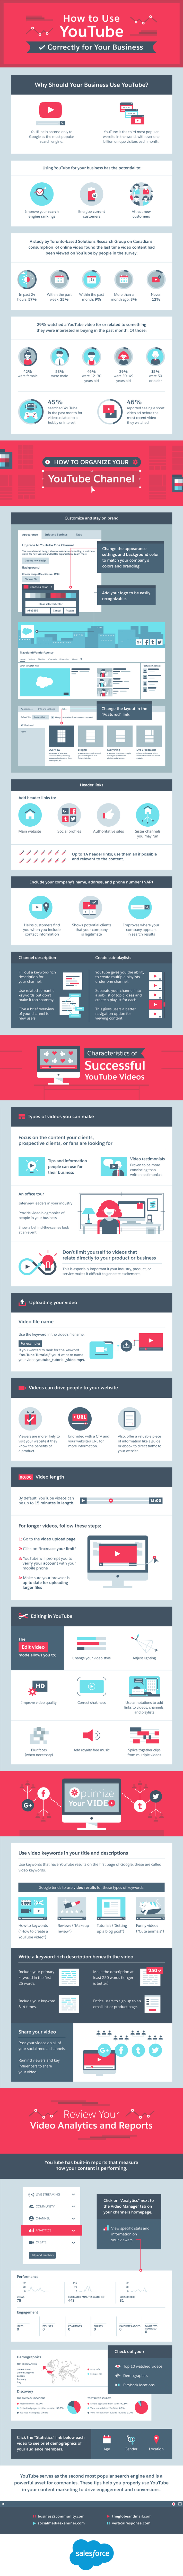 How to Use YouTube Correctly for Your Business Infographic